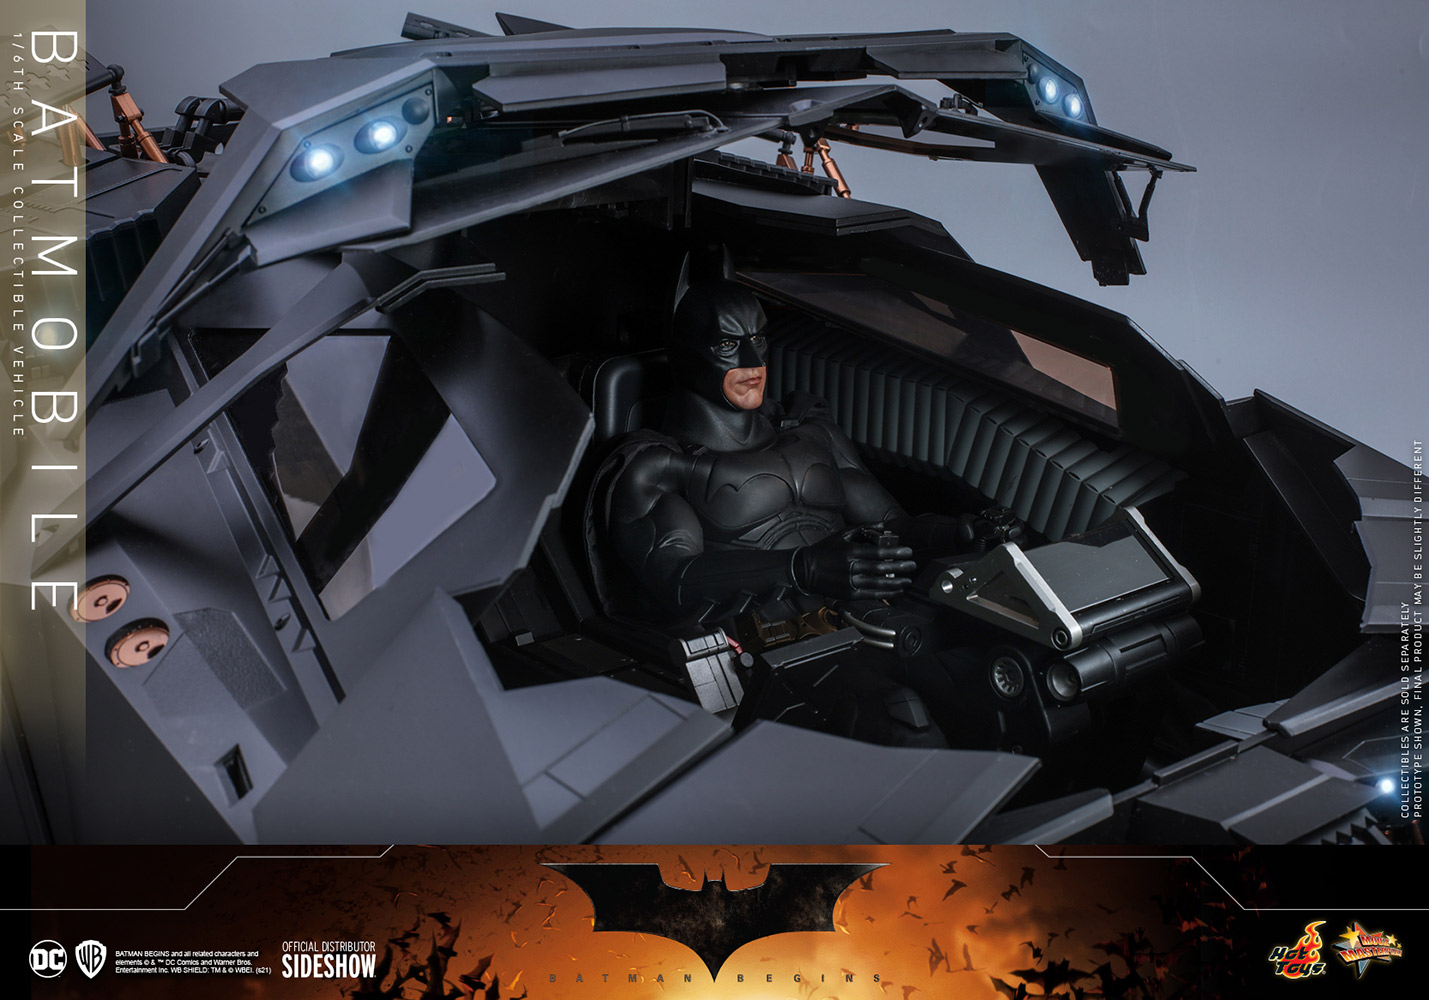 New Hot Toys Batmobile Unveiled From Sideshow - DC Comics News